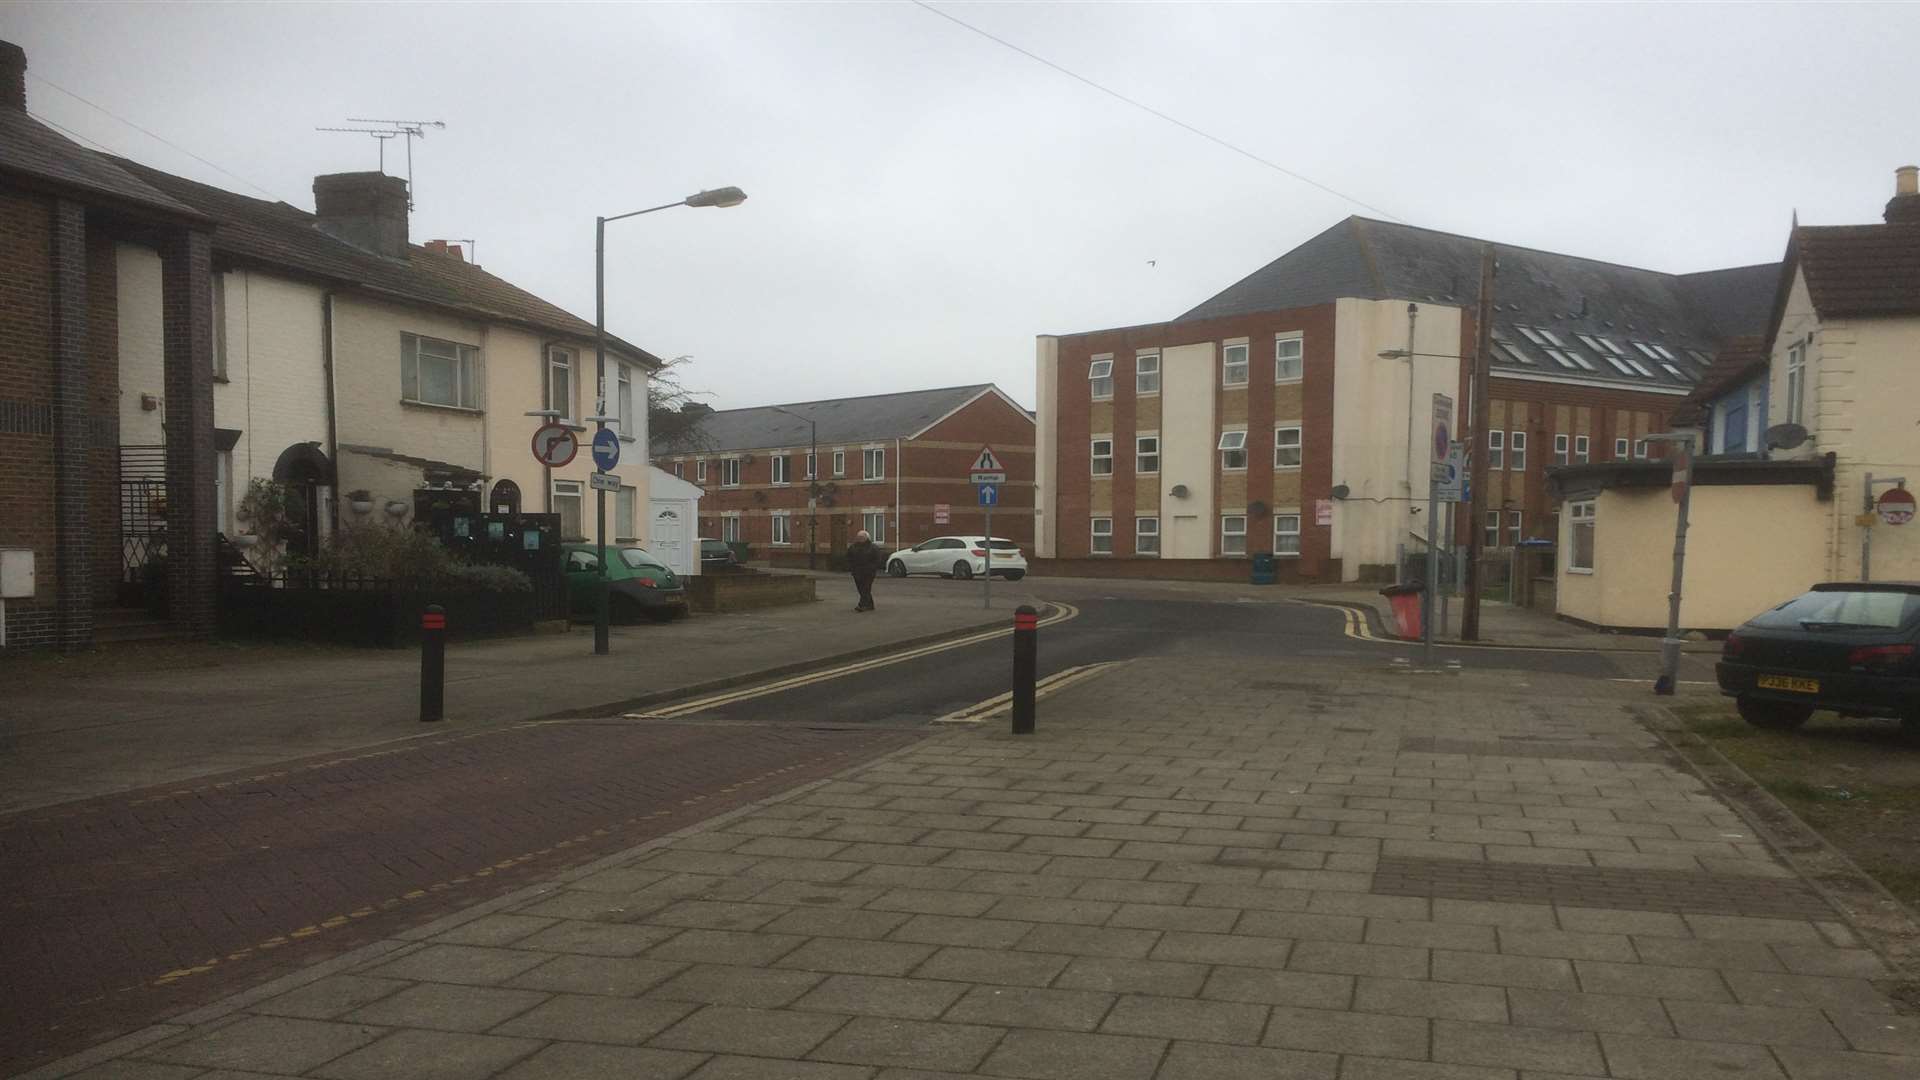 Two bodies were found at the block of flats in Gillingham